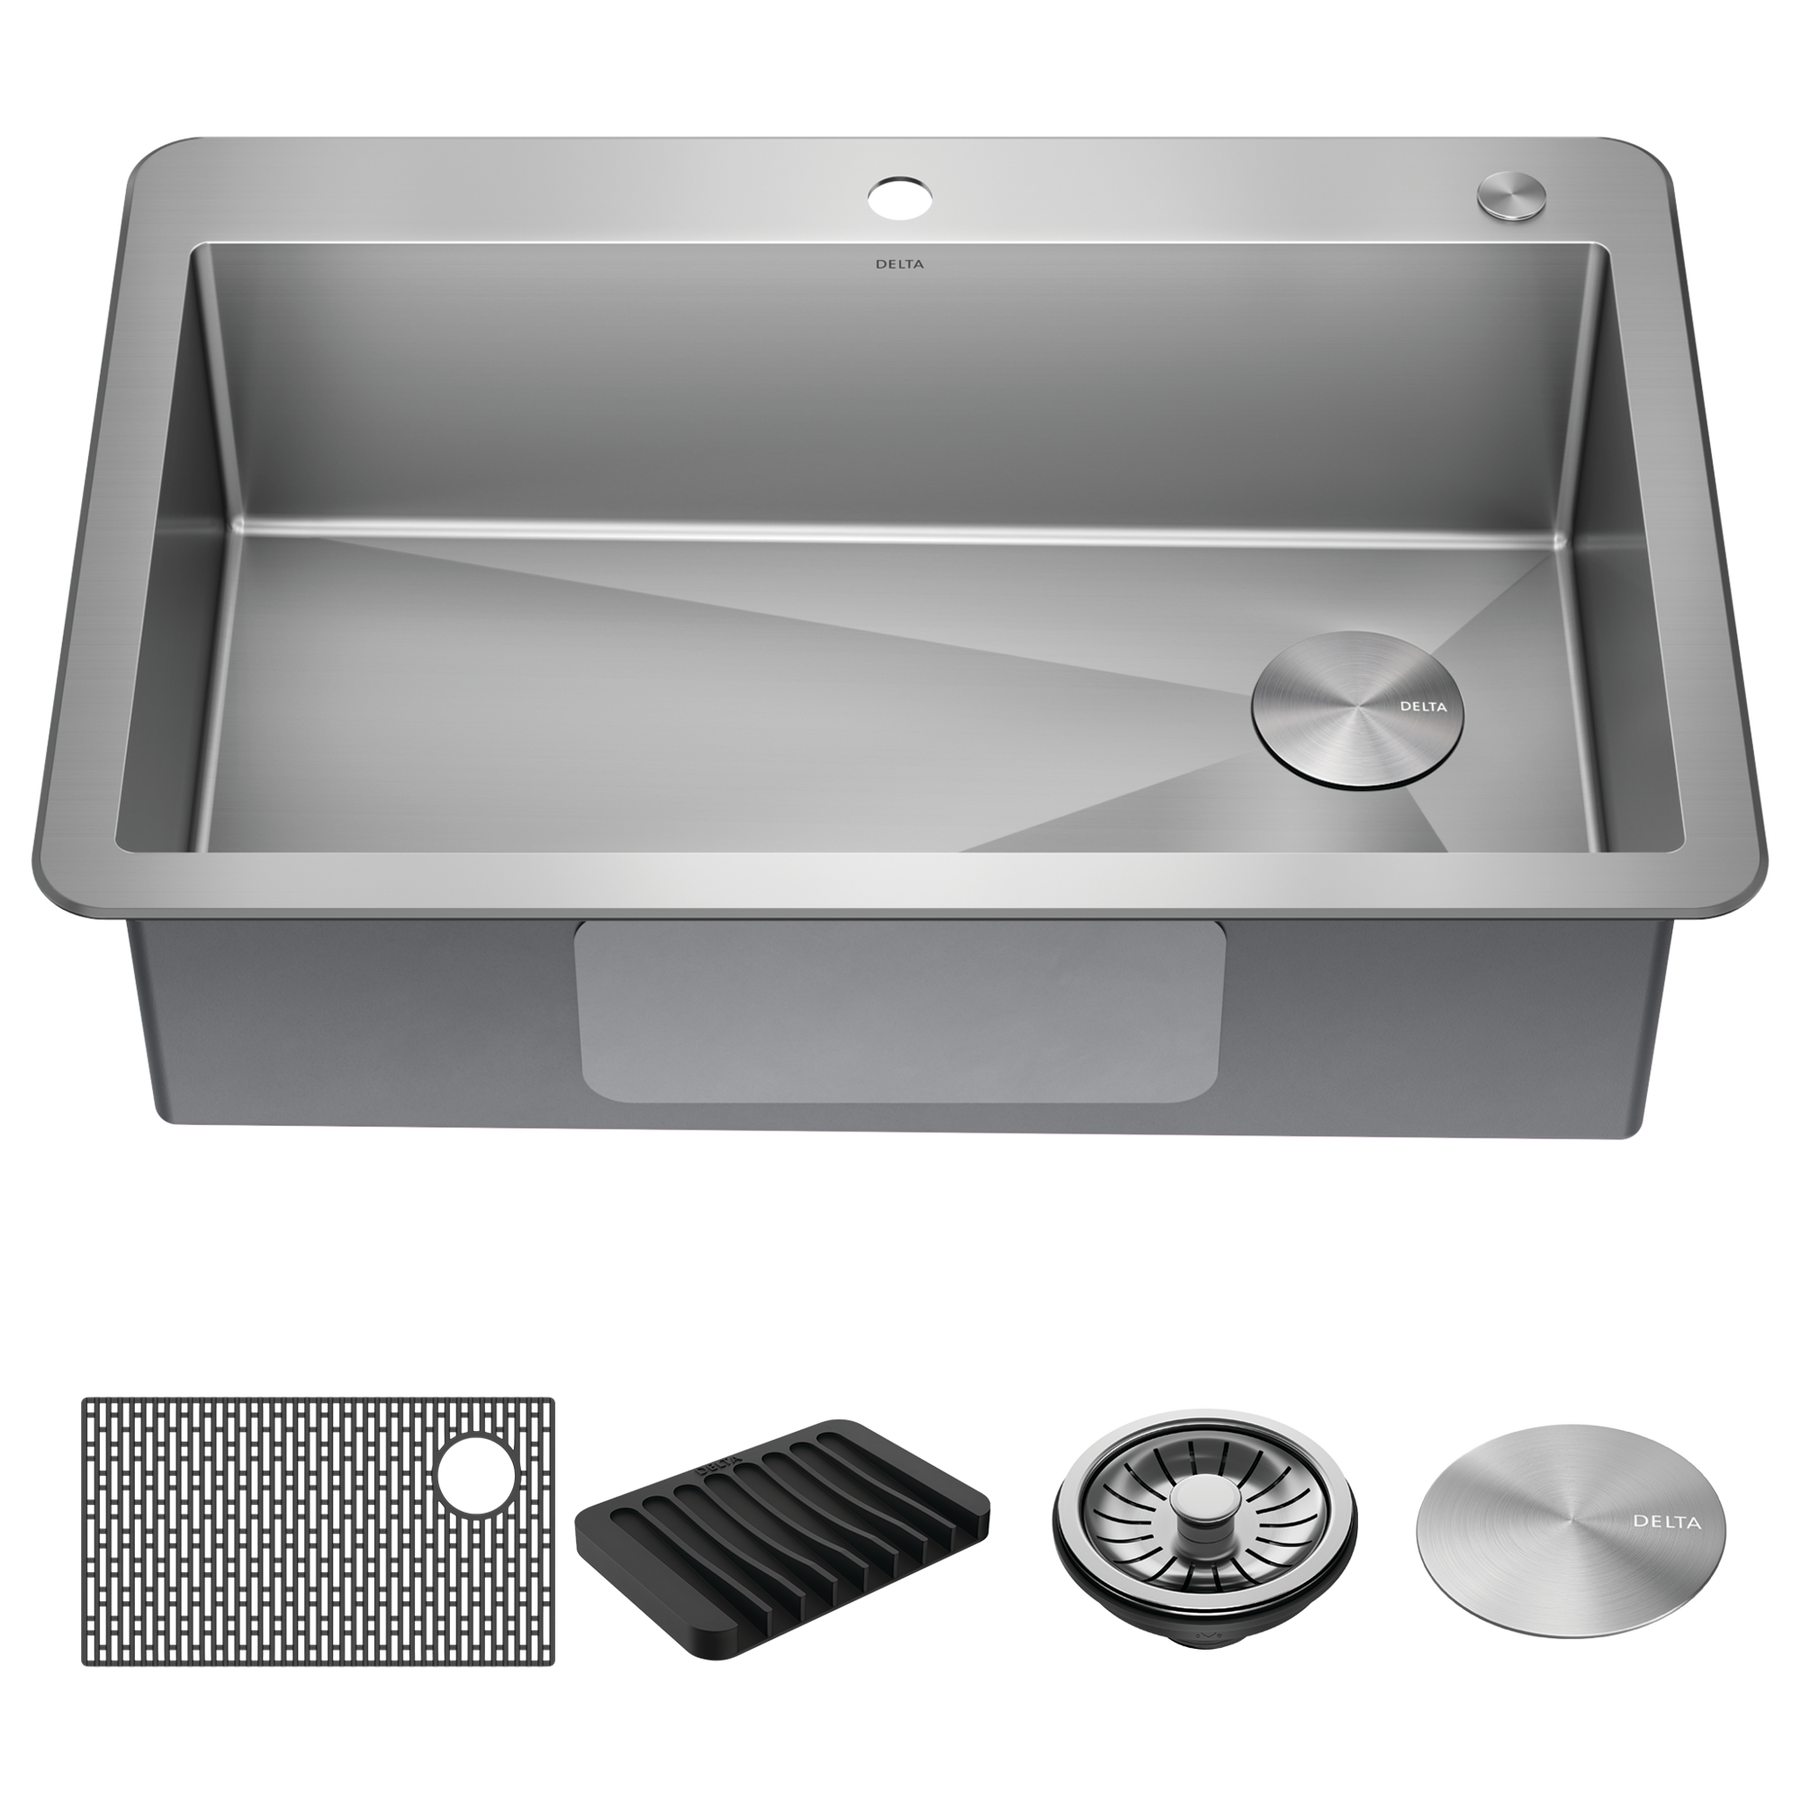 RV Sinks Dish Pan Accessories and Parts